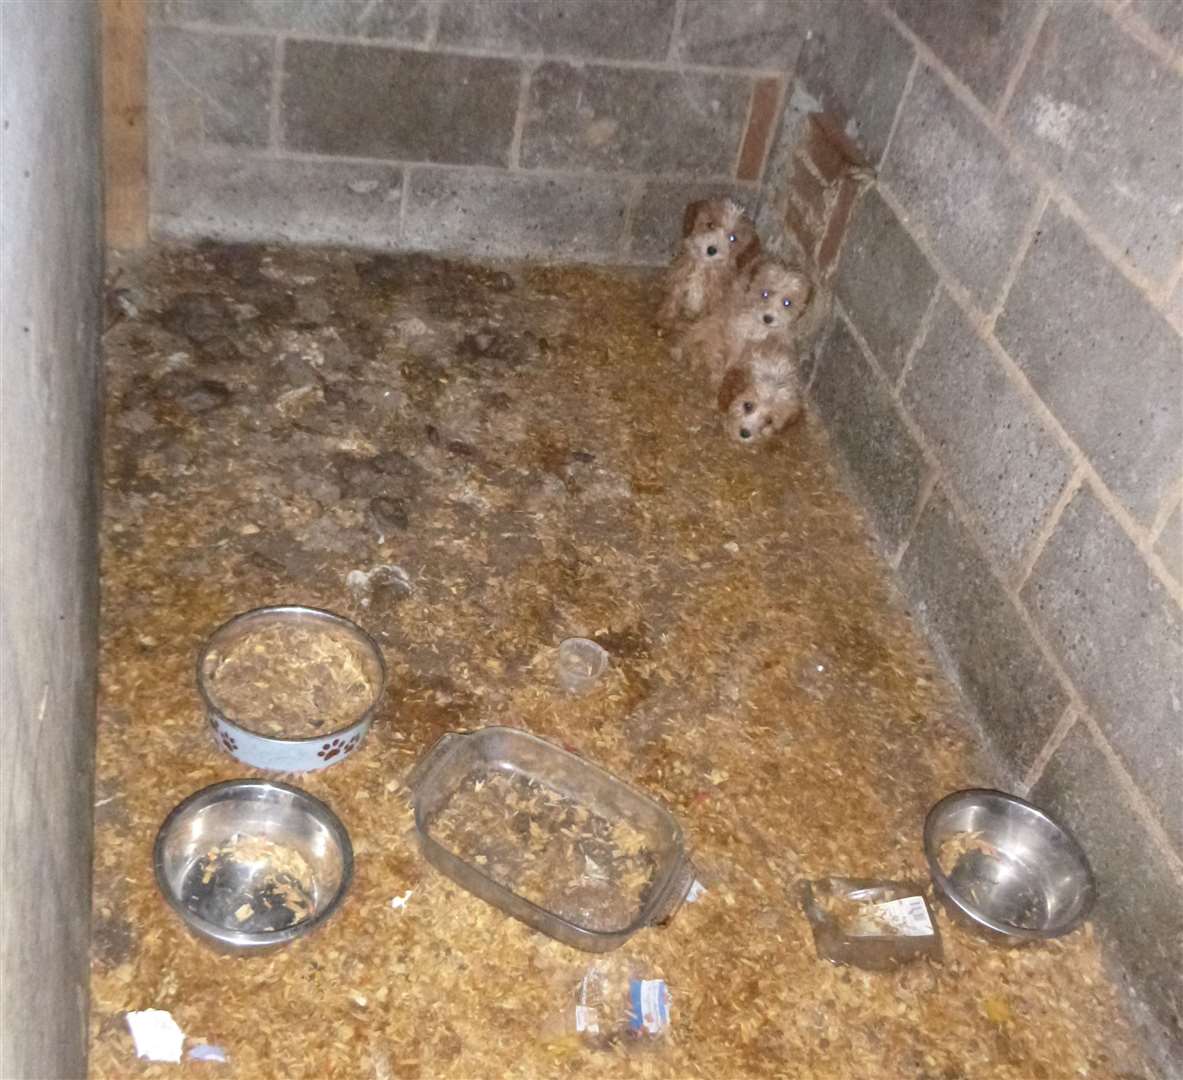 Three cavapoo puppies were found in a shed at the property. Picture: RSPCA